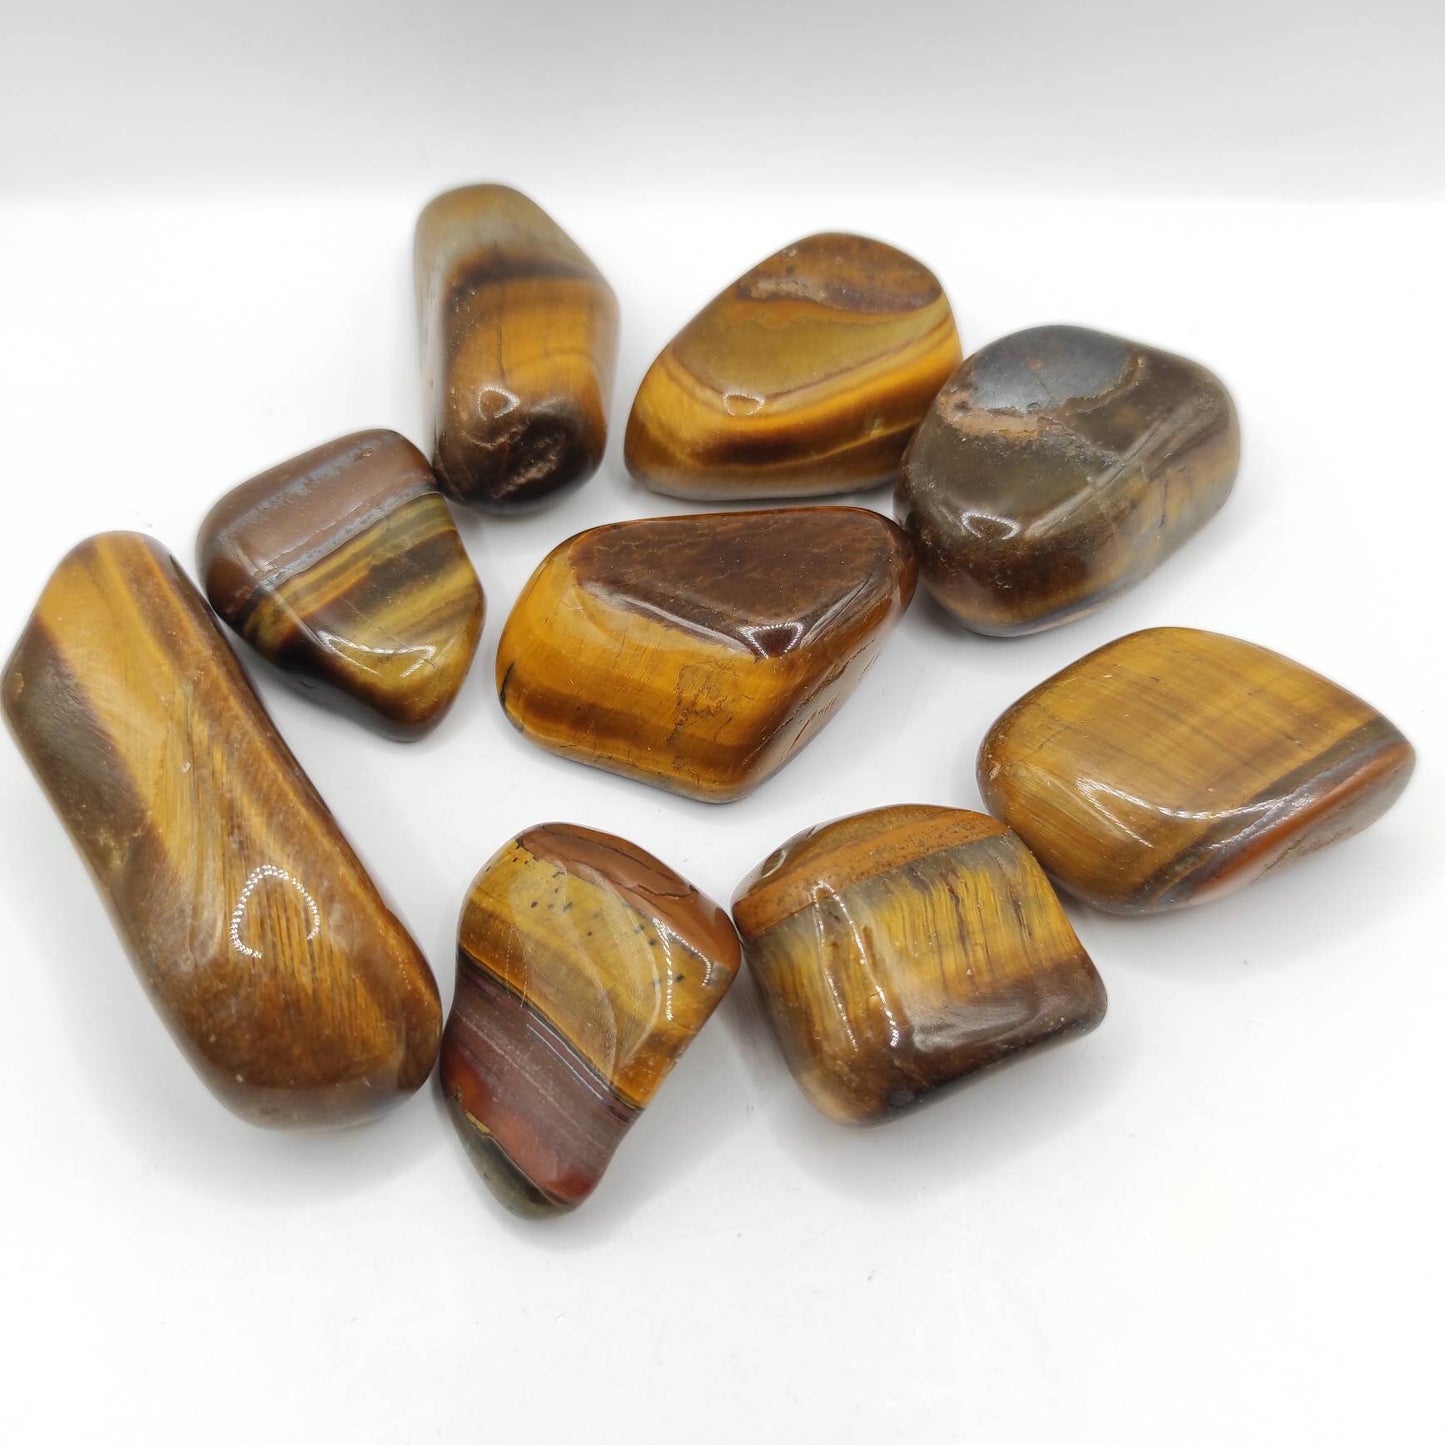 235g Unique Lot of Tiger Eye Tumbles Natural Tiger's Eye Polished Stones Tumbled 25-55mm Brown Tiger Eye Gemstone South Africa Loose Tumbles